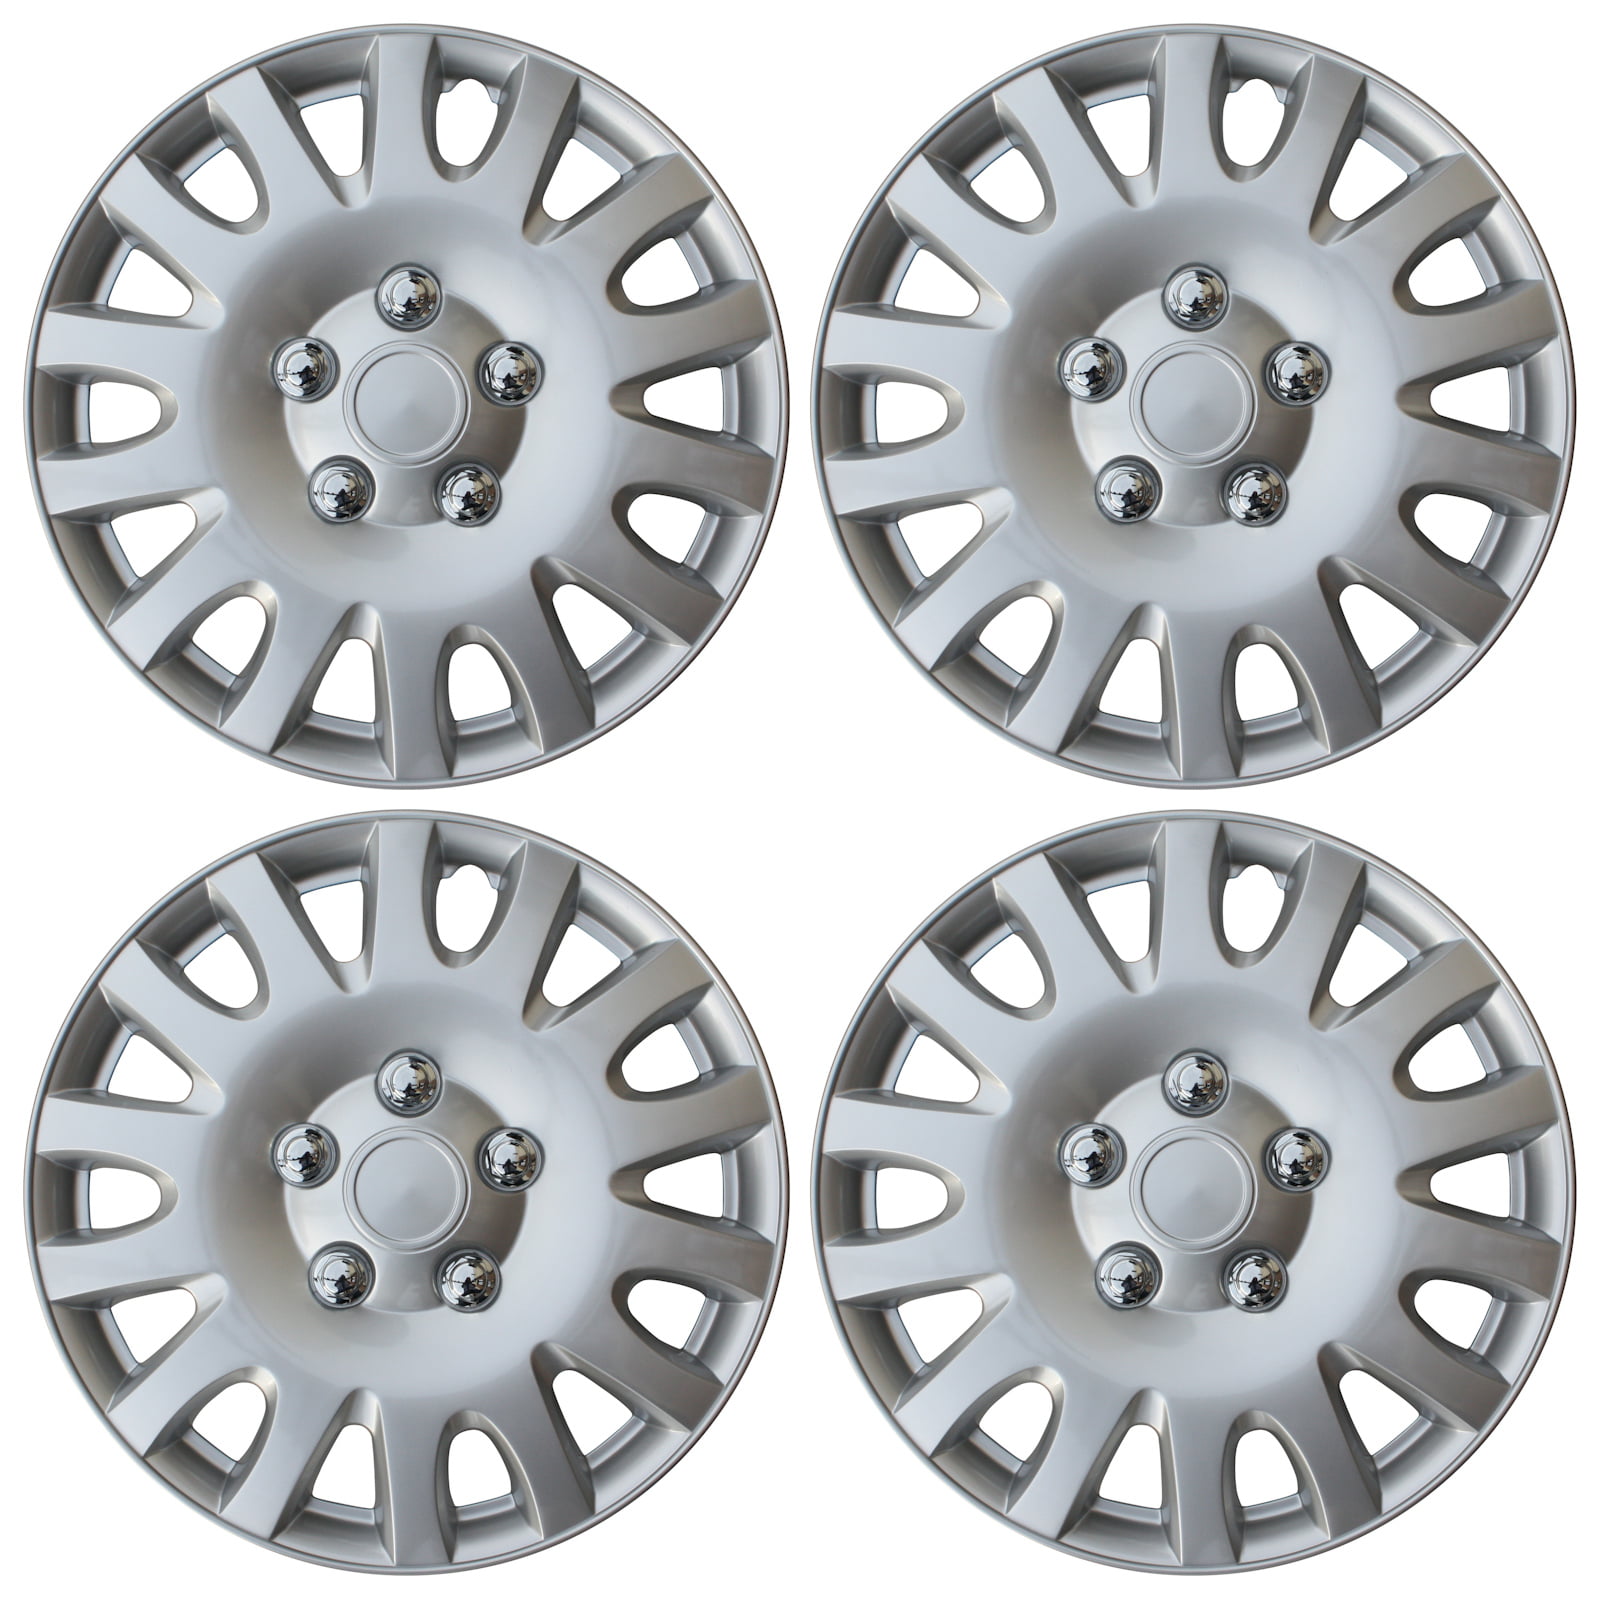 4 pc HubCaps ABS Silver 16" Inch Rim Wheel Universal Cover Hub Caps Covers Cap 